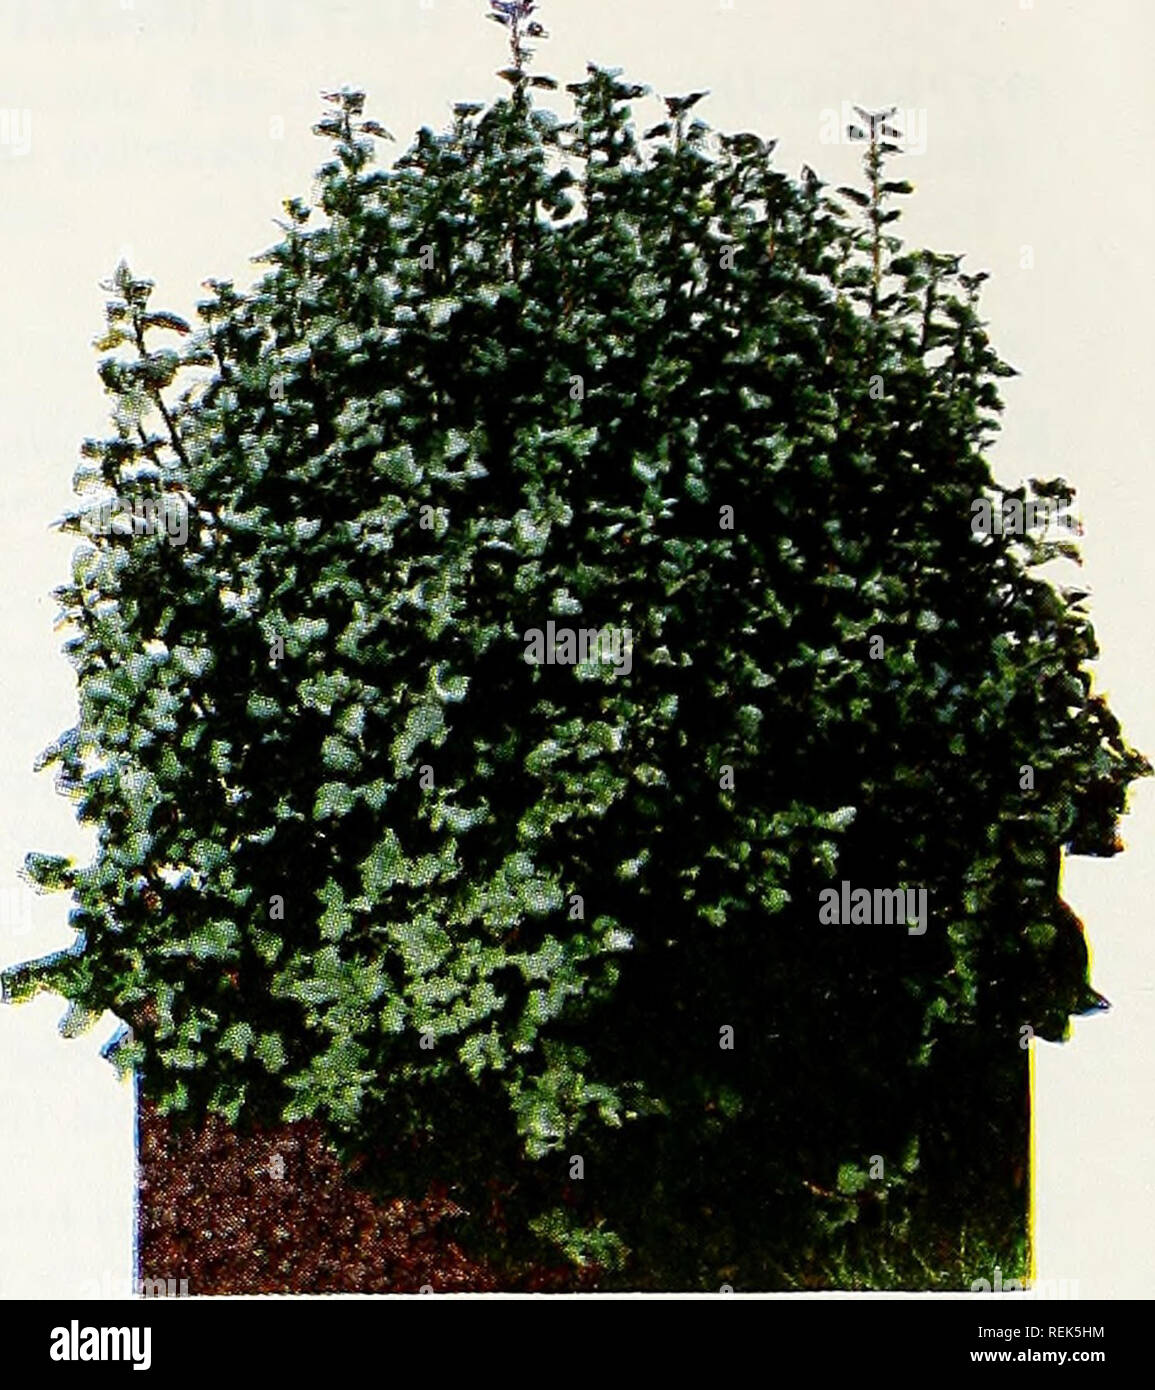 . C. M. Hobbs &amp; Sons. Nurseries Horticulture Catalogs; Evergreens Catalogs; Fruit trees Catalogs; Climbing plants Catalogs; Shrubs Catalogs; Vegetables Catalogs. C. M. HOBBS &amp; SONS, Inc. PRIVET - Ligustrum LIGUSTRUM amurense (Amur River Privet). See hedge plants on page 7. L. vicari (Golden Privet). A compact shrub with a golden foliage for use in hedges or with evergreens or shrubs to add color contrast. Requires sun and can be trimmed to most any shape desired. L. ibolium (Ibolium Privet). See hedge plants on page 7. L. ibota regelianum (Regel's Privet). 3 to 6 ft. A dense graceful s Stock Photo